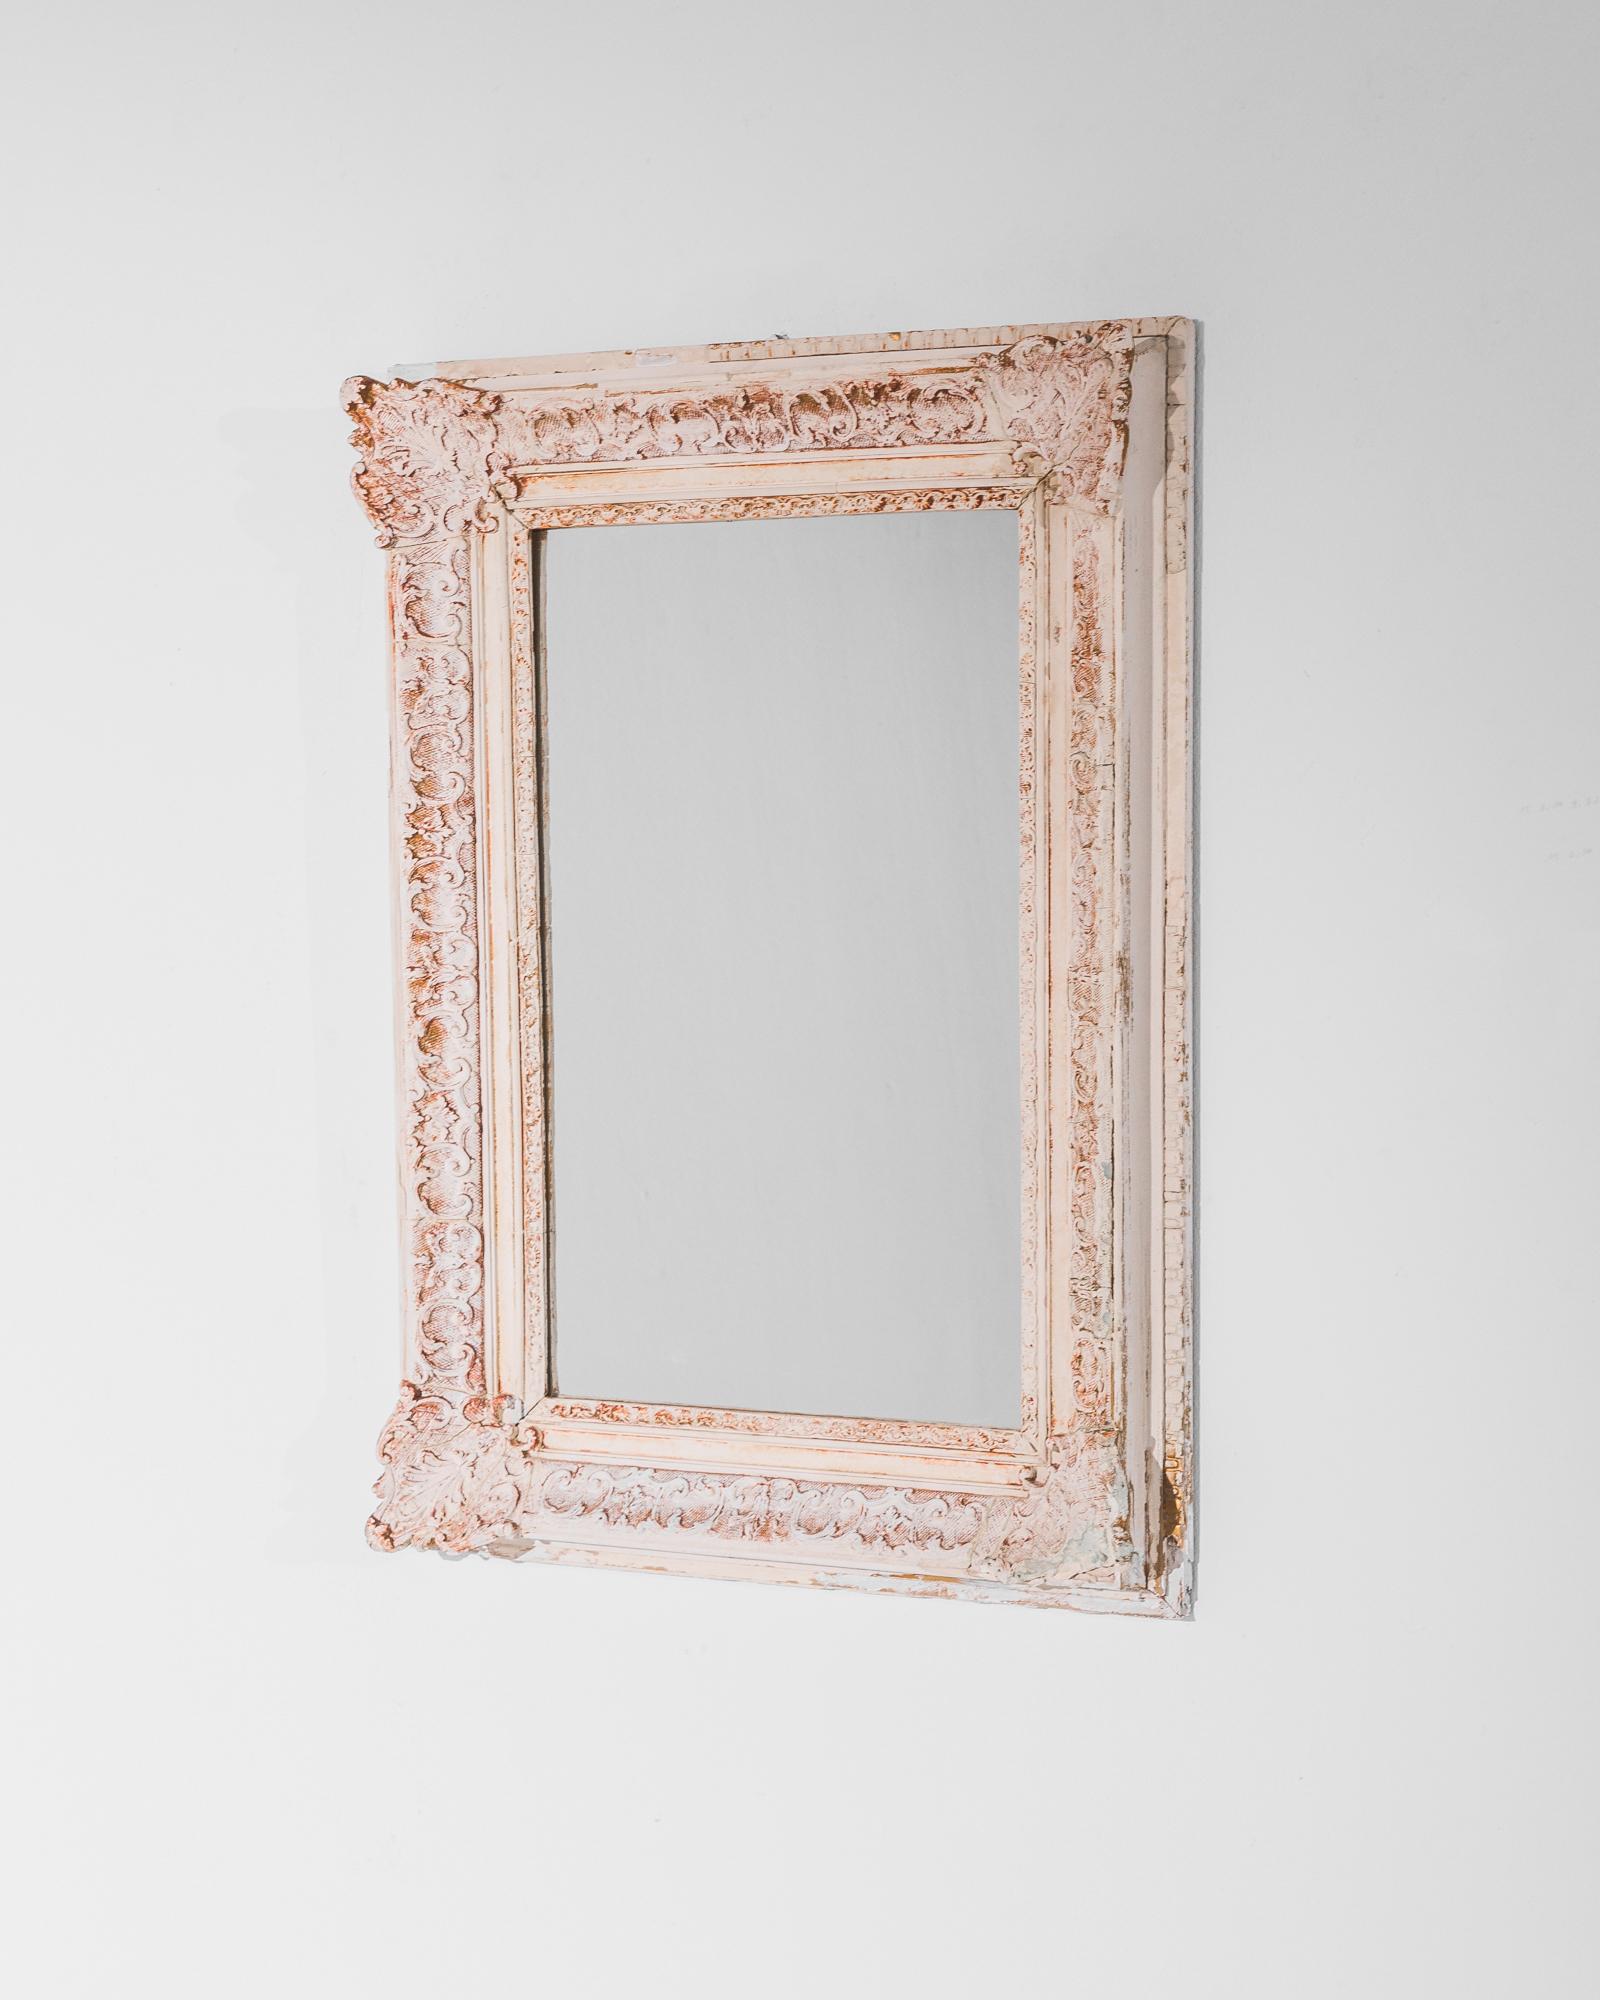 A wooden mirror from 1880s France. Elaborate Rococo carvings decorate the wings of the frame, highlighted by the contrasting tones of the patinated wood. The design of scrolling leaves and the soft, bright color palette, ranging from cream to deep